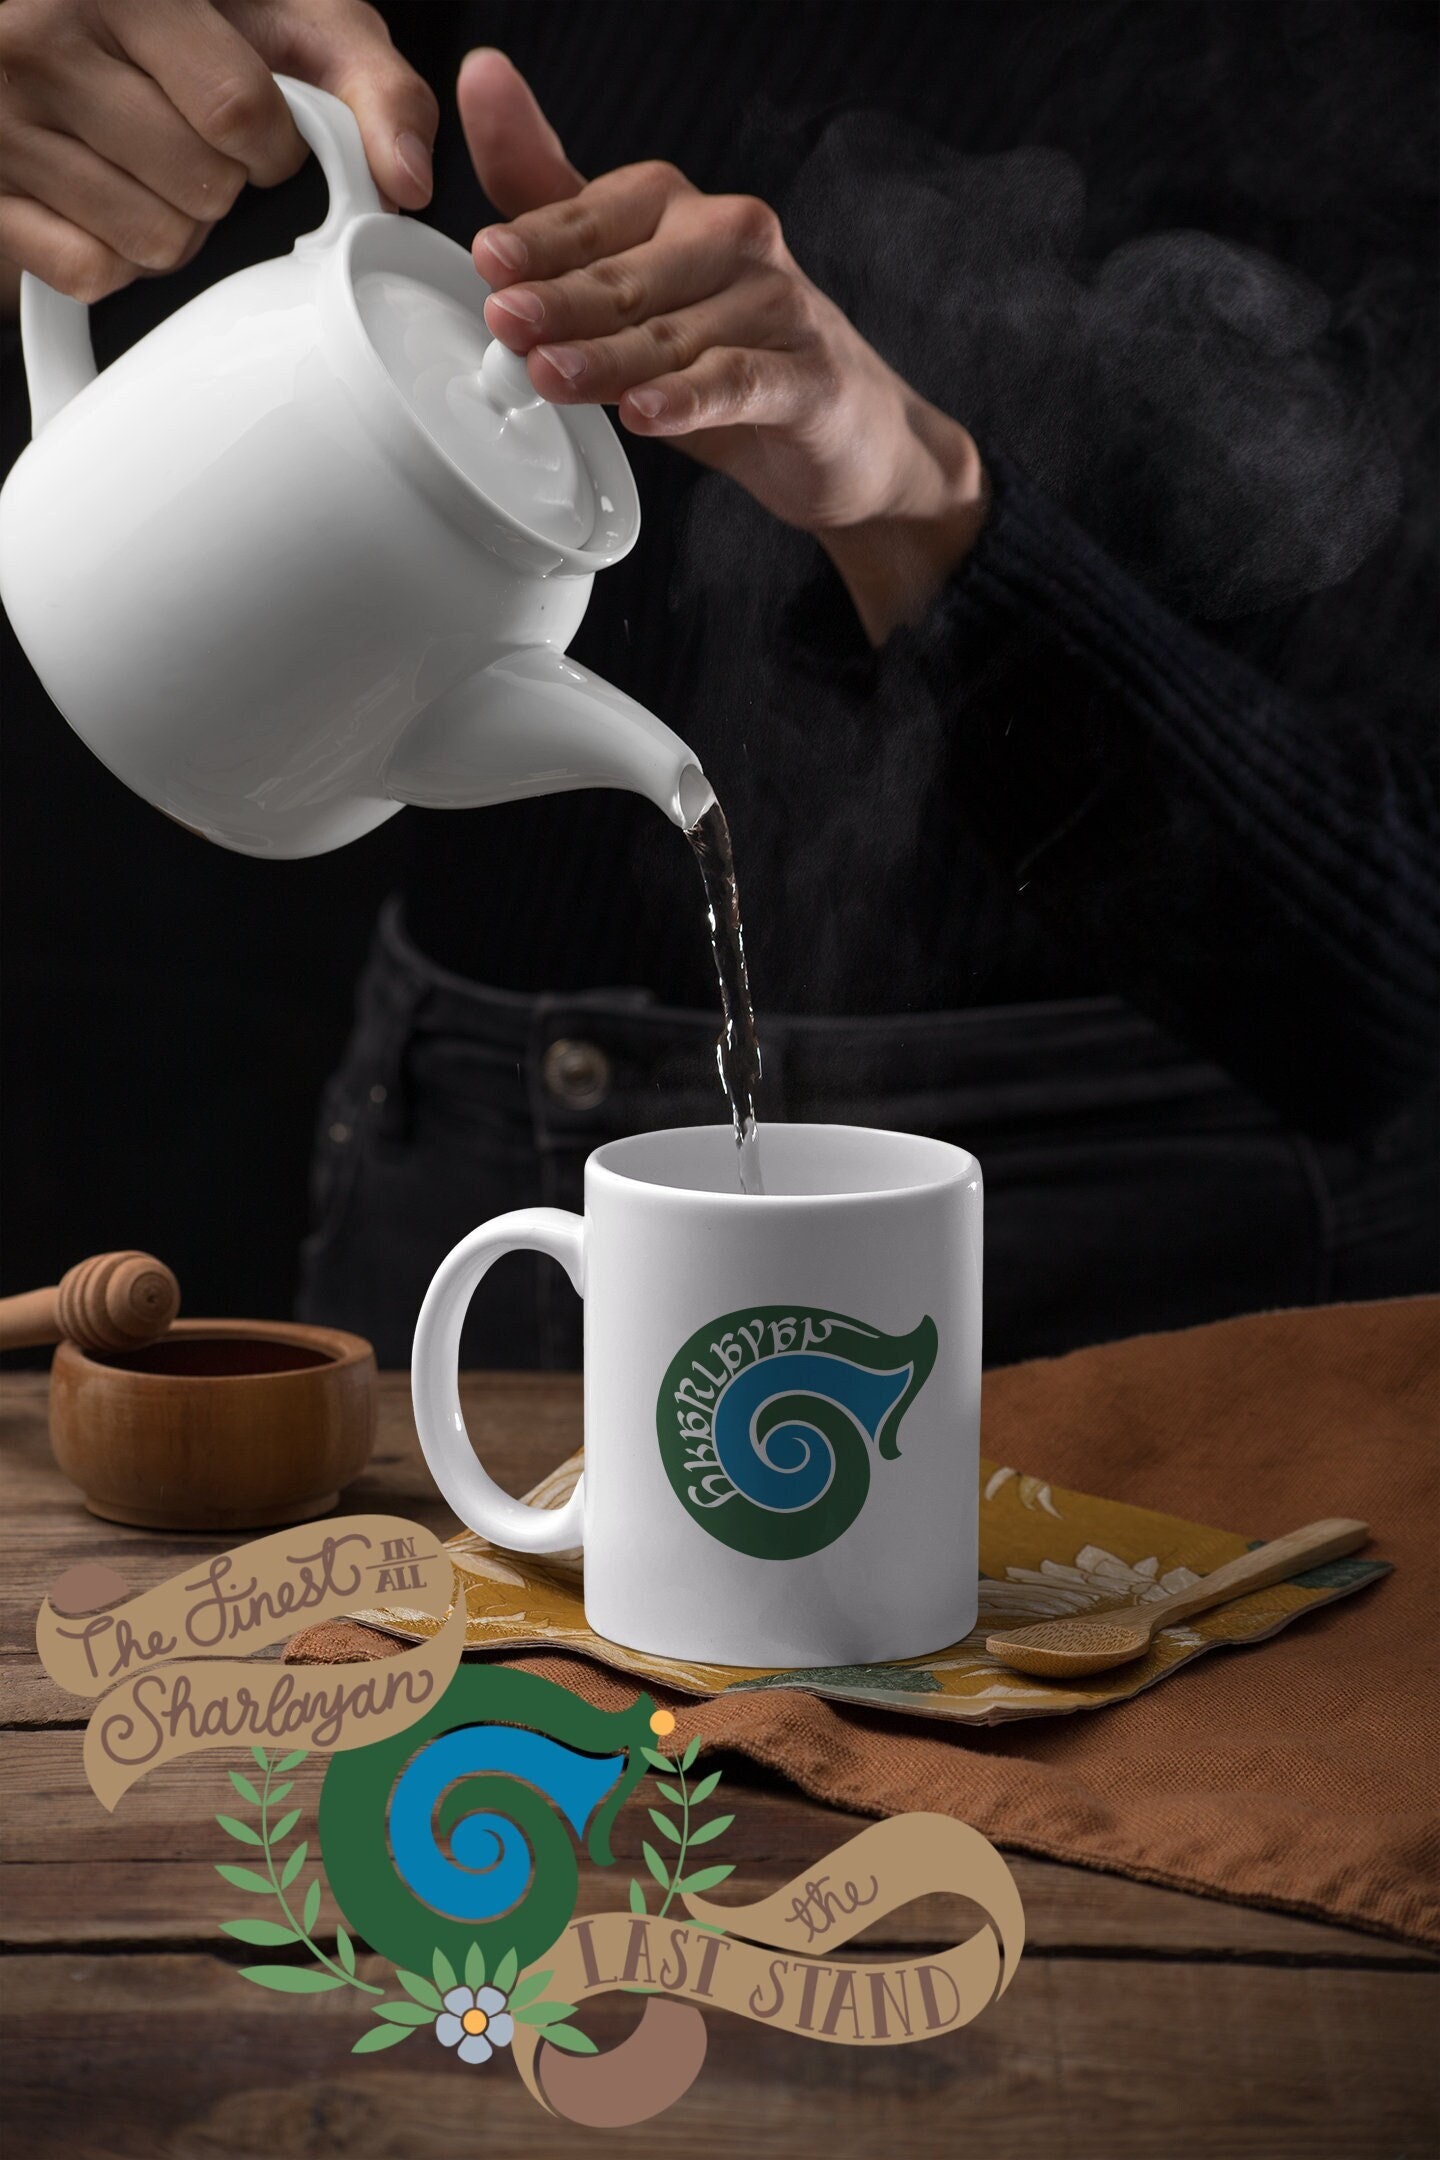 The Last Stand in Sharlayan Coffee Mug Based off of the Cafe in